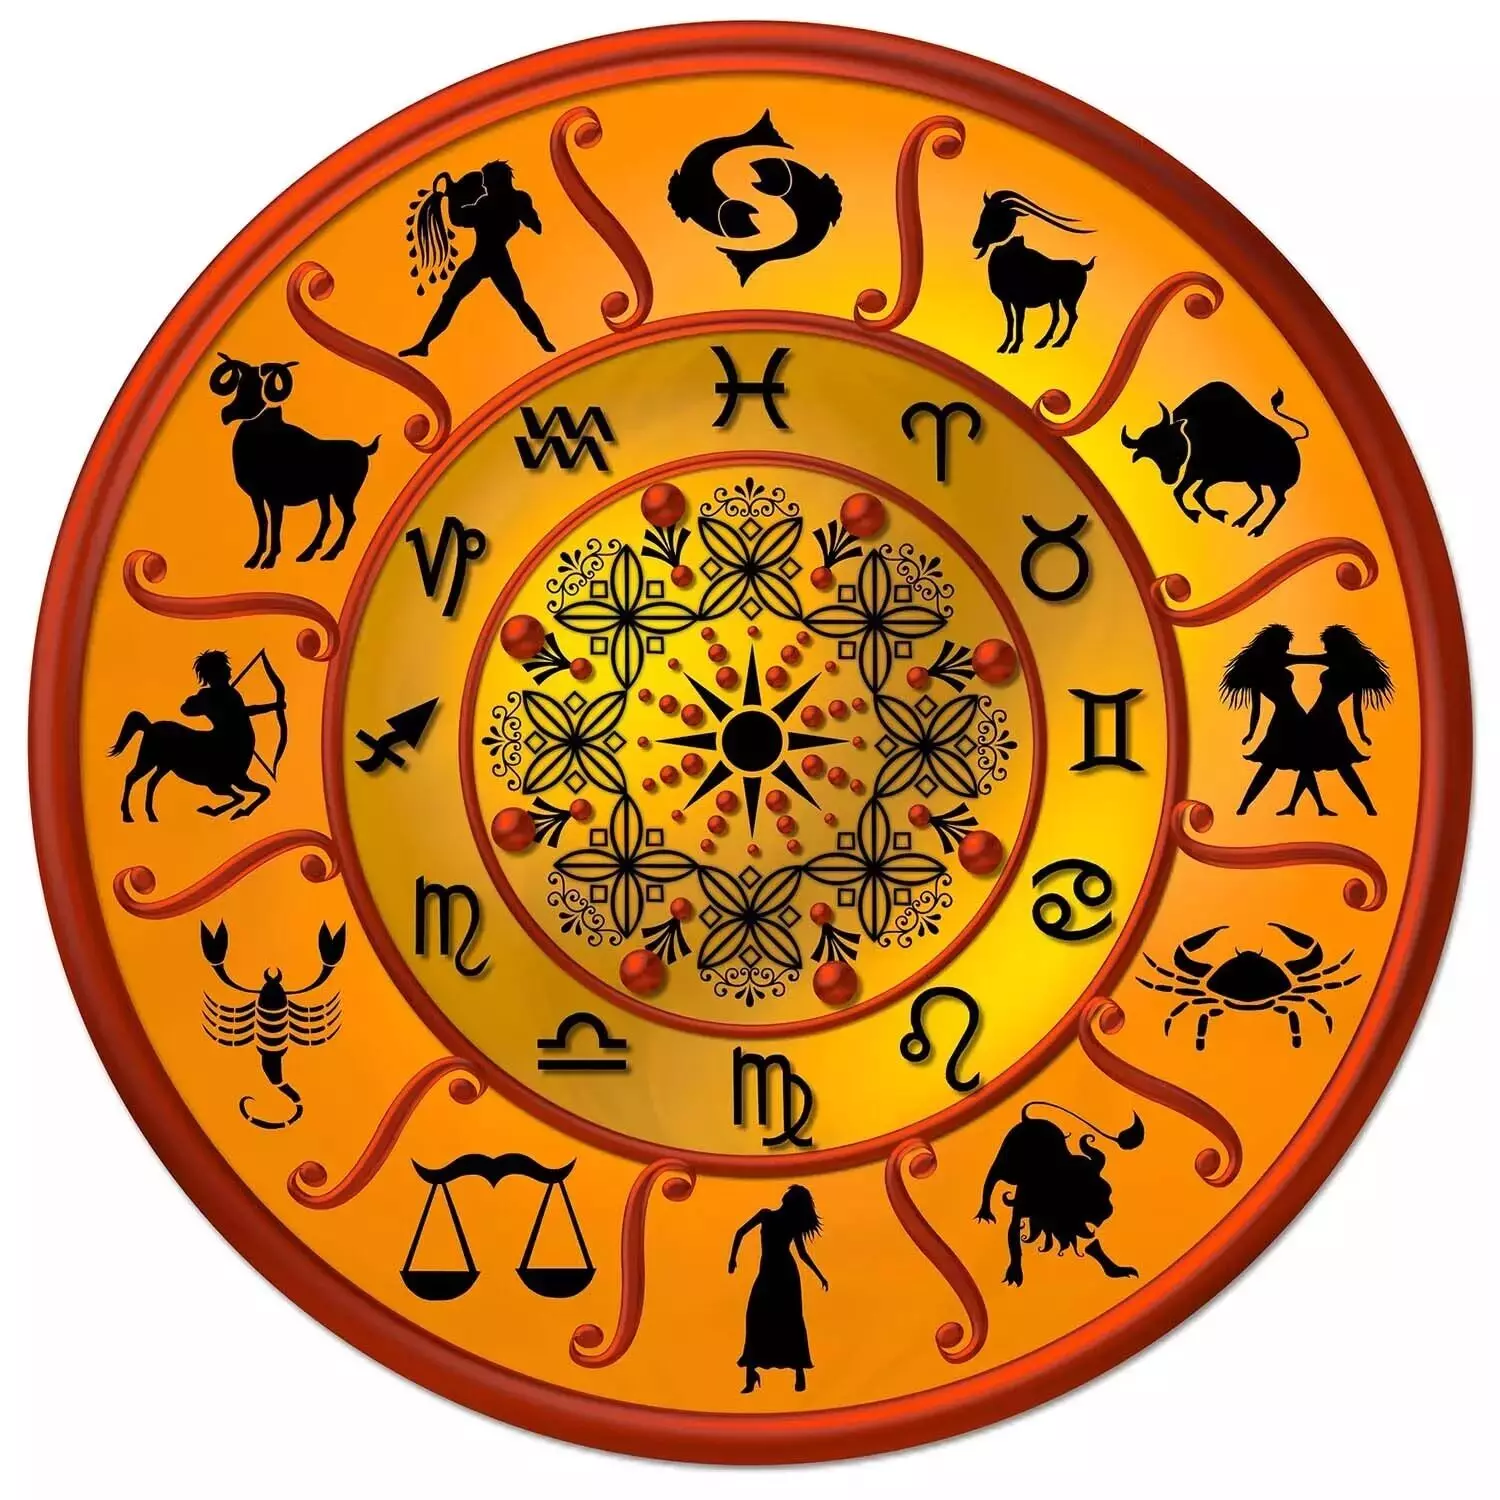 04 September  – Know your todays horoscope